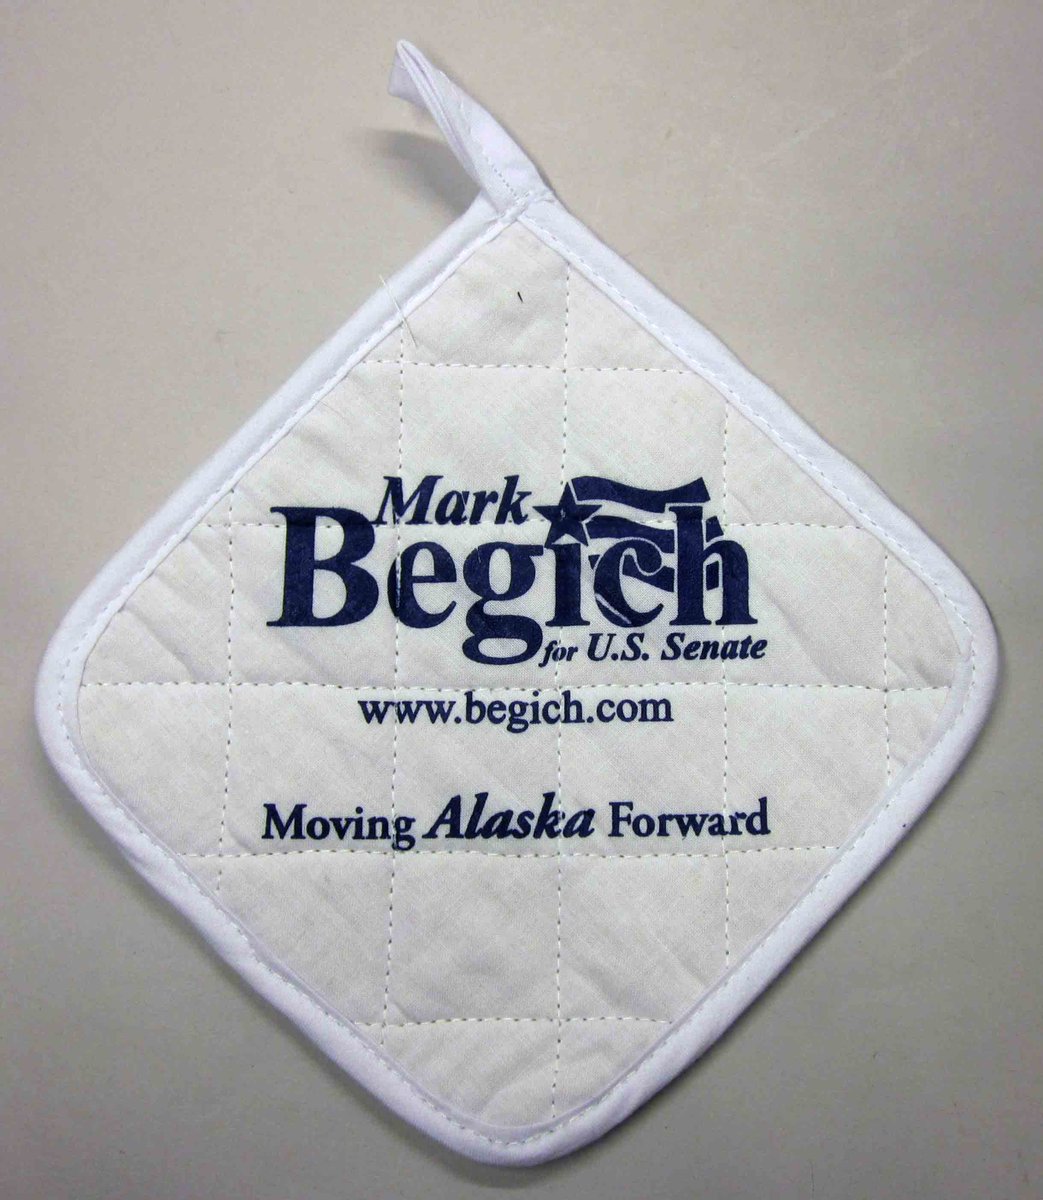 2008 Mark Begich potholder for his successful U.S. Senate campaign that year. I love practical political swag like this. Via Anchorage Museum. #alaskahistory #alaska